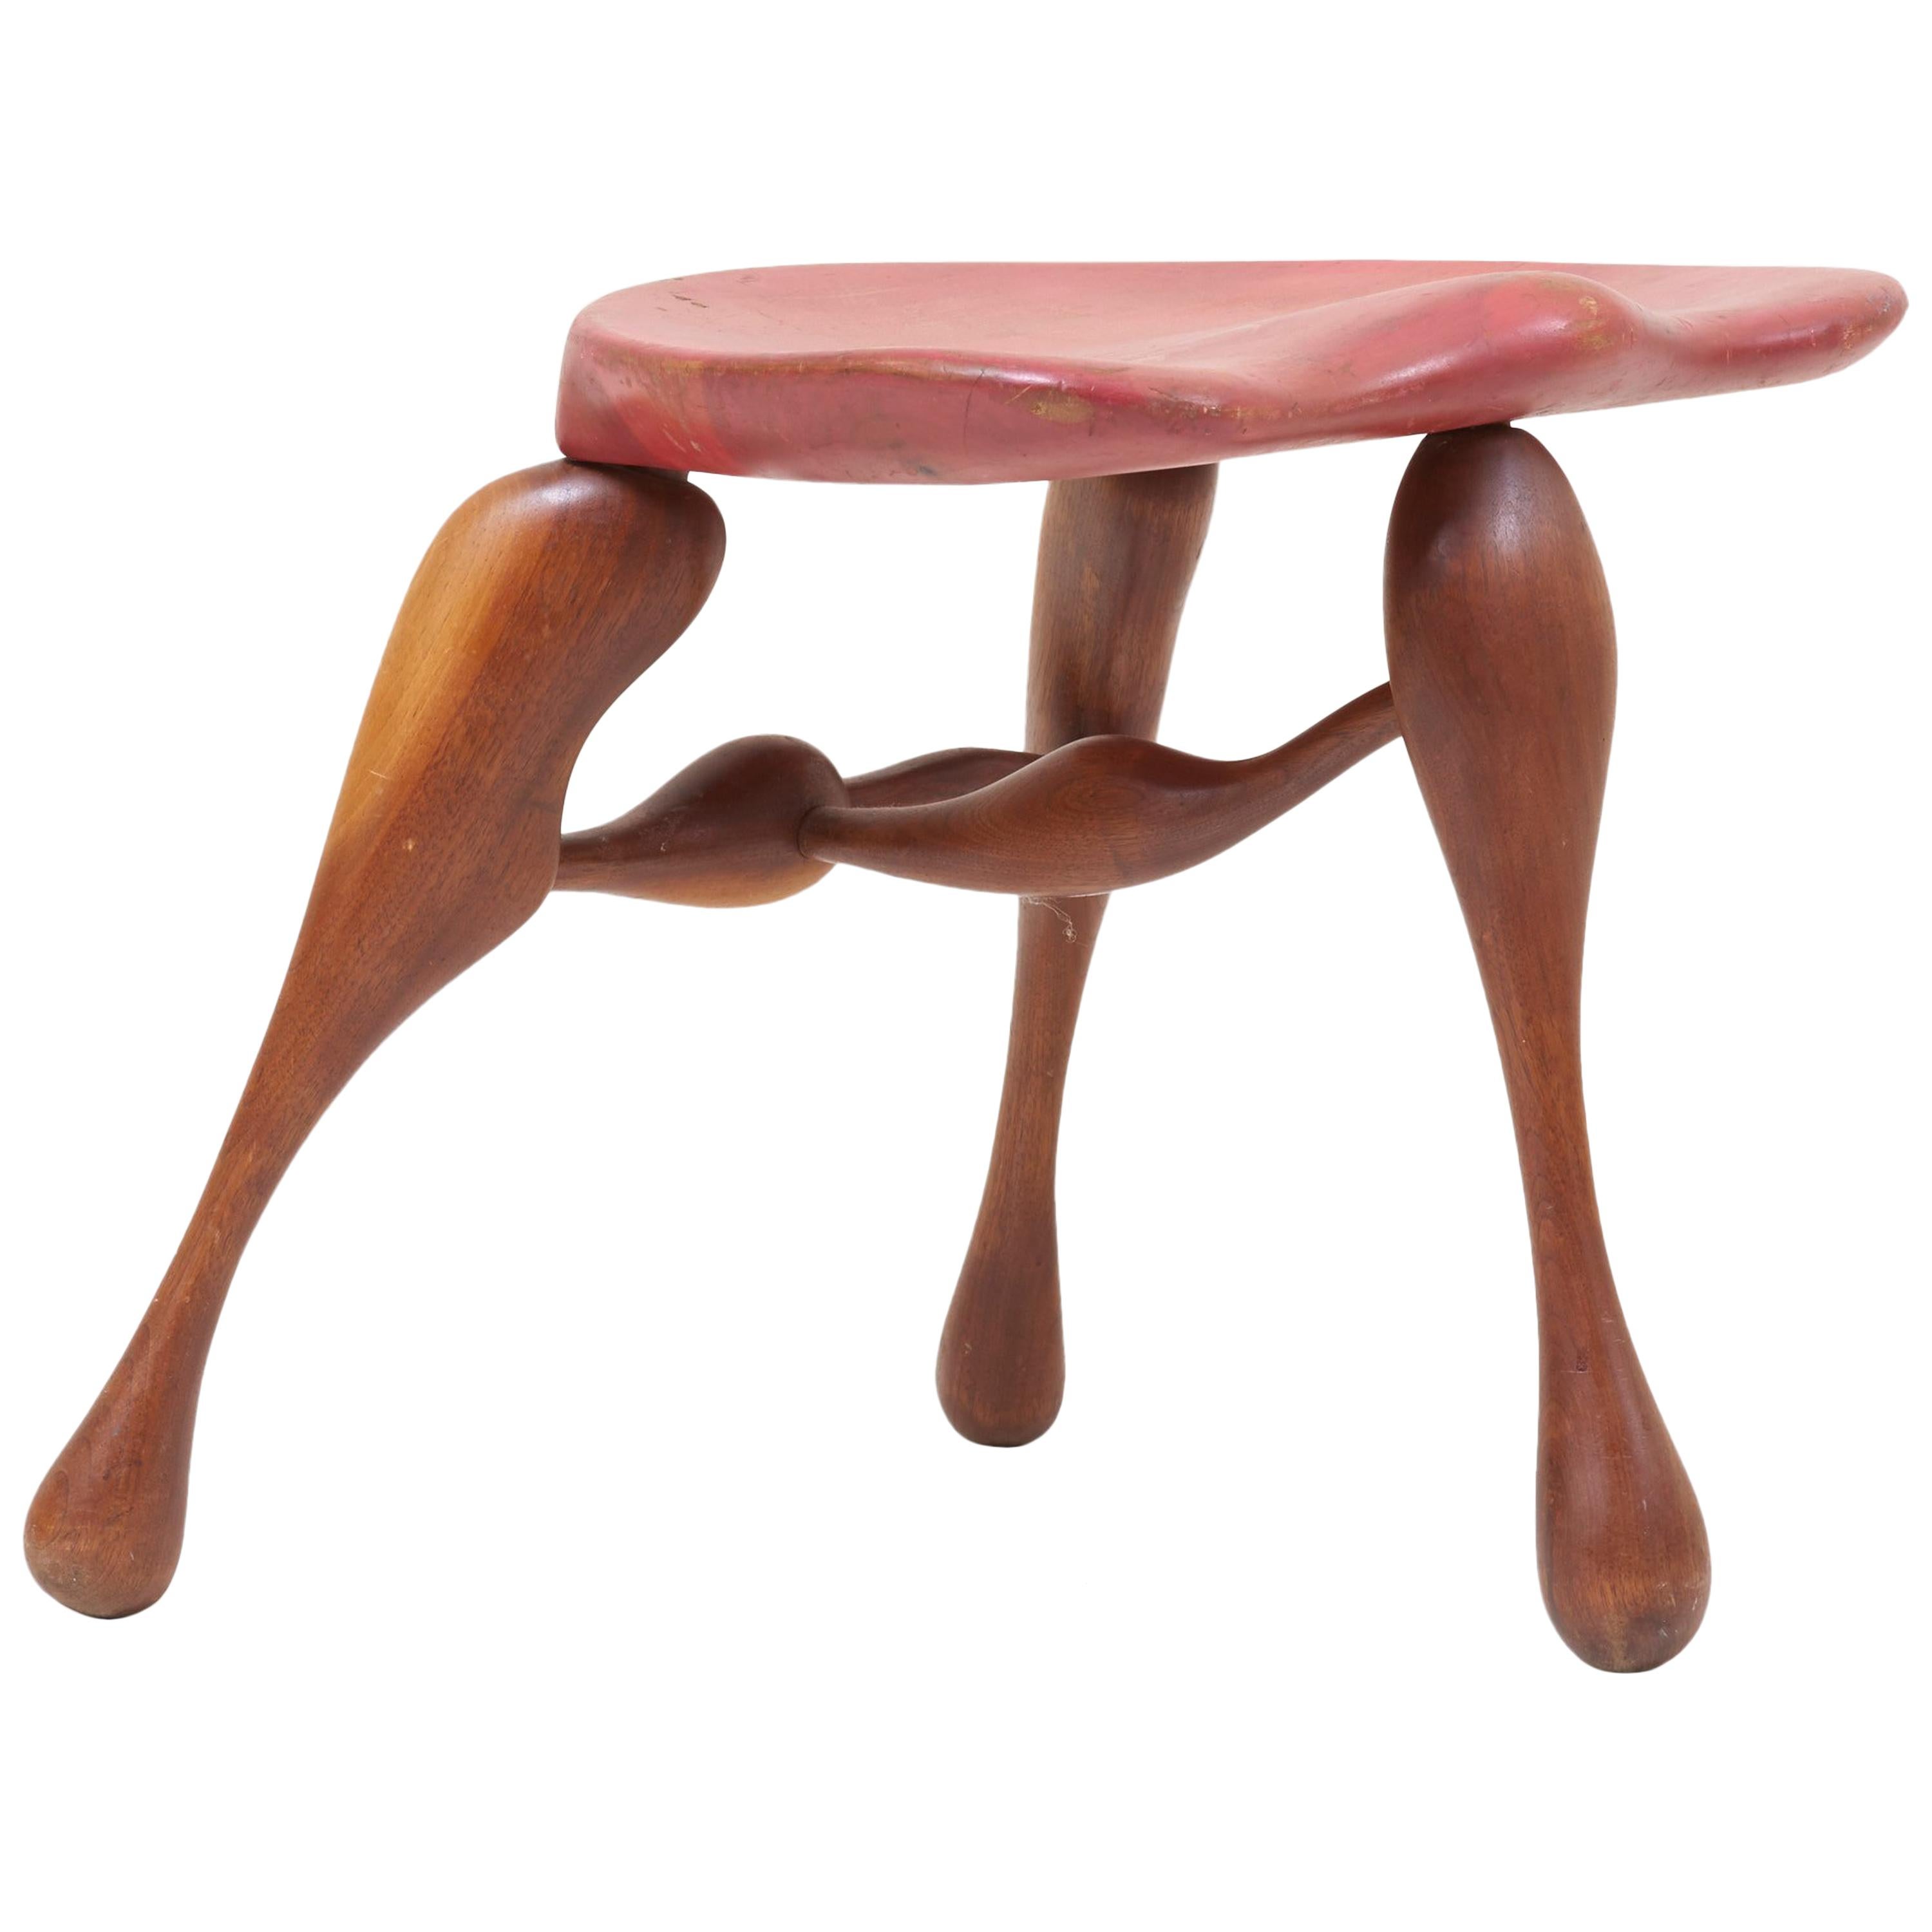 Studio Craft Wooden Stool by Ron Curtis, US, 1950s